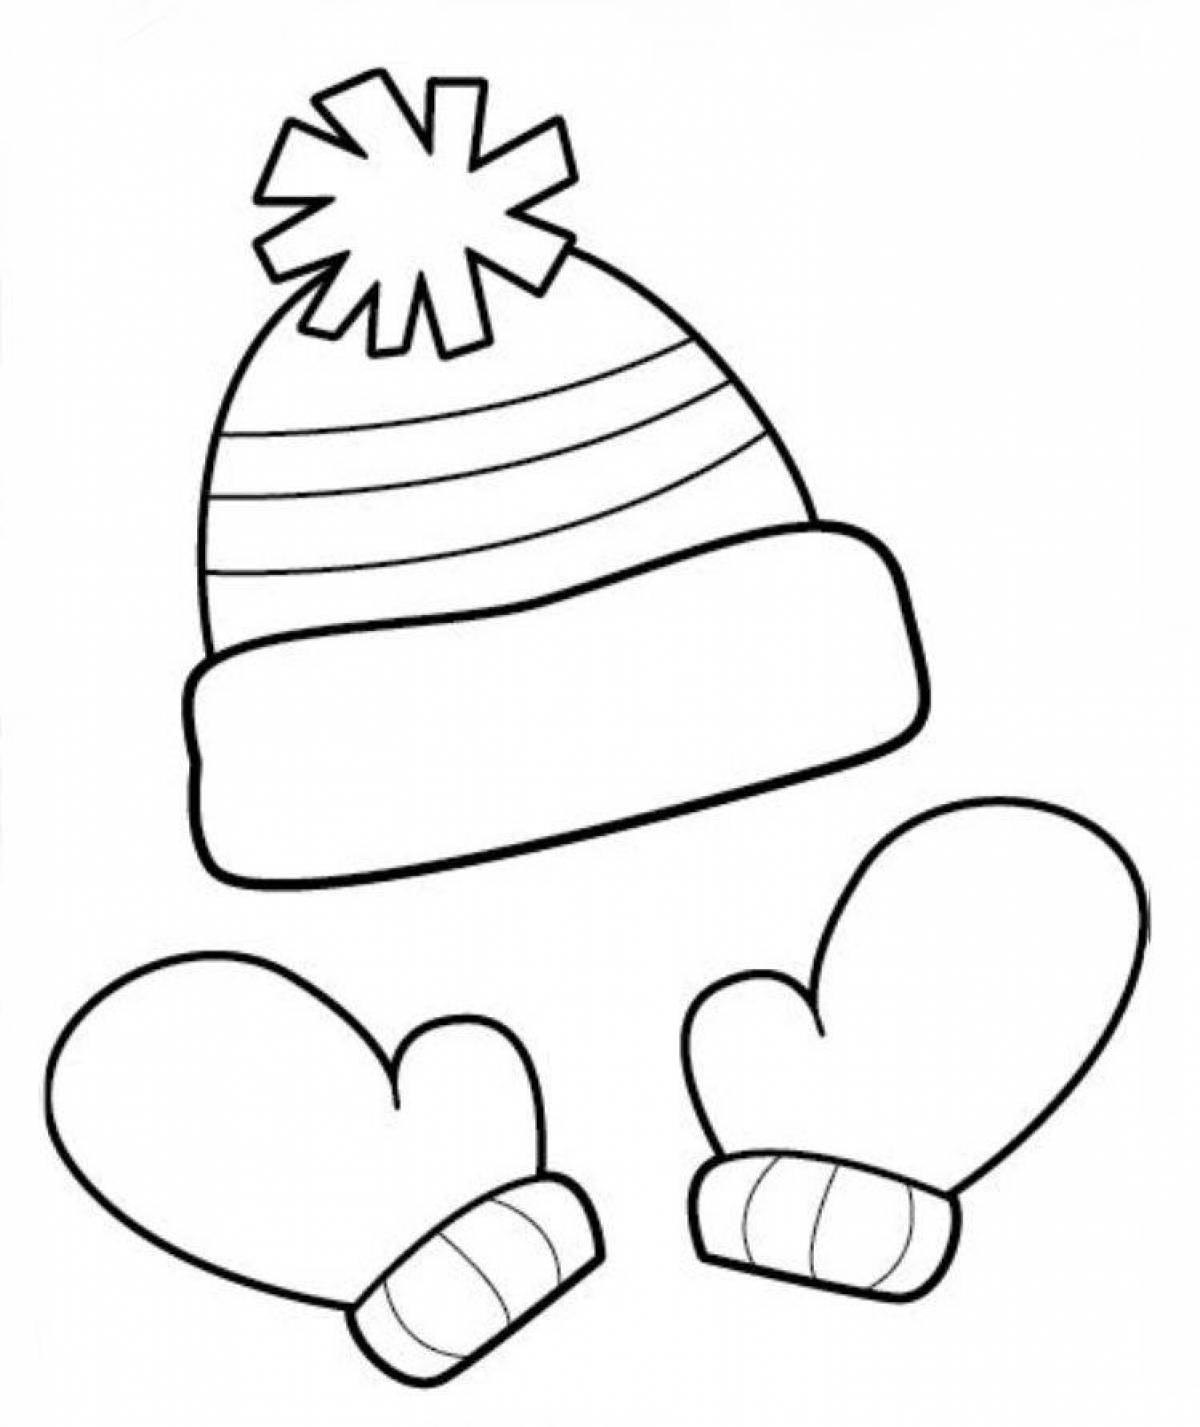 Coloring page charming cap